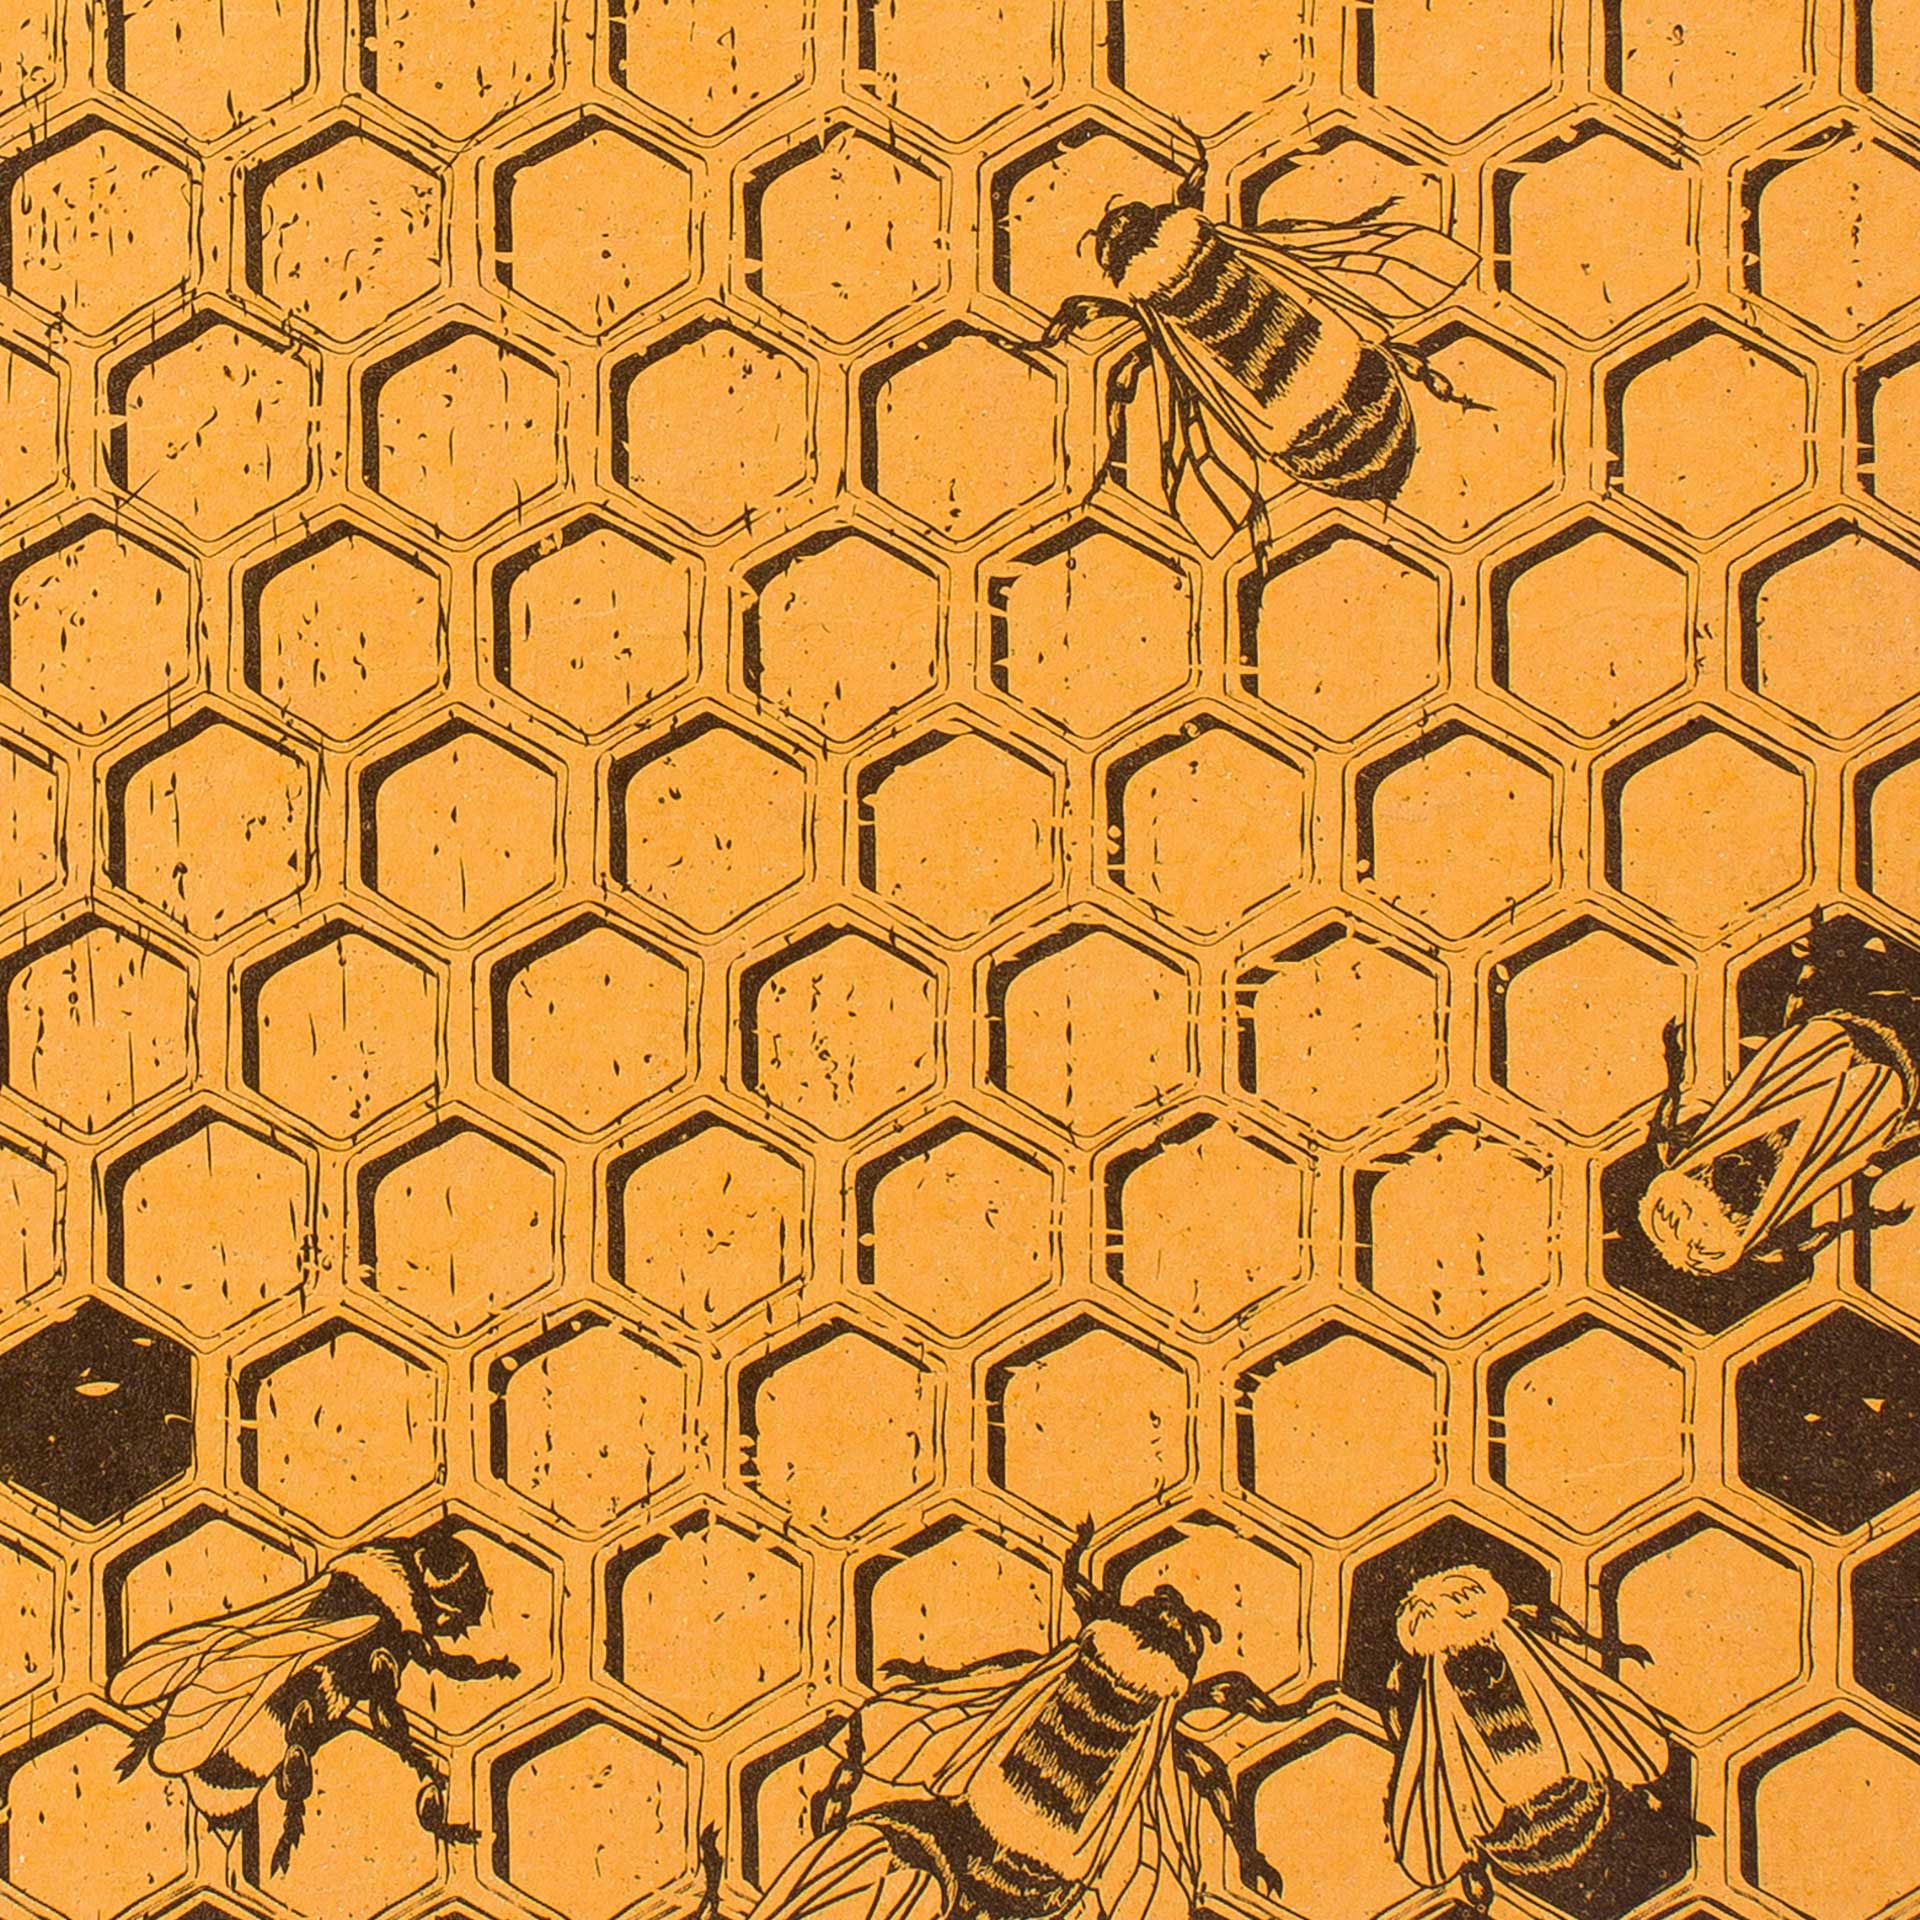 Closeup of a printed honeycomb pattern and bees